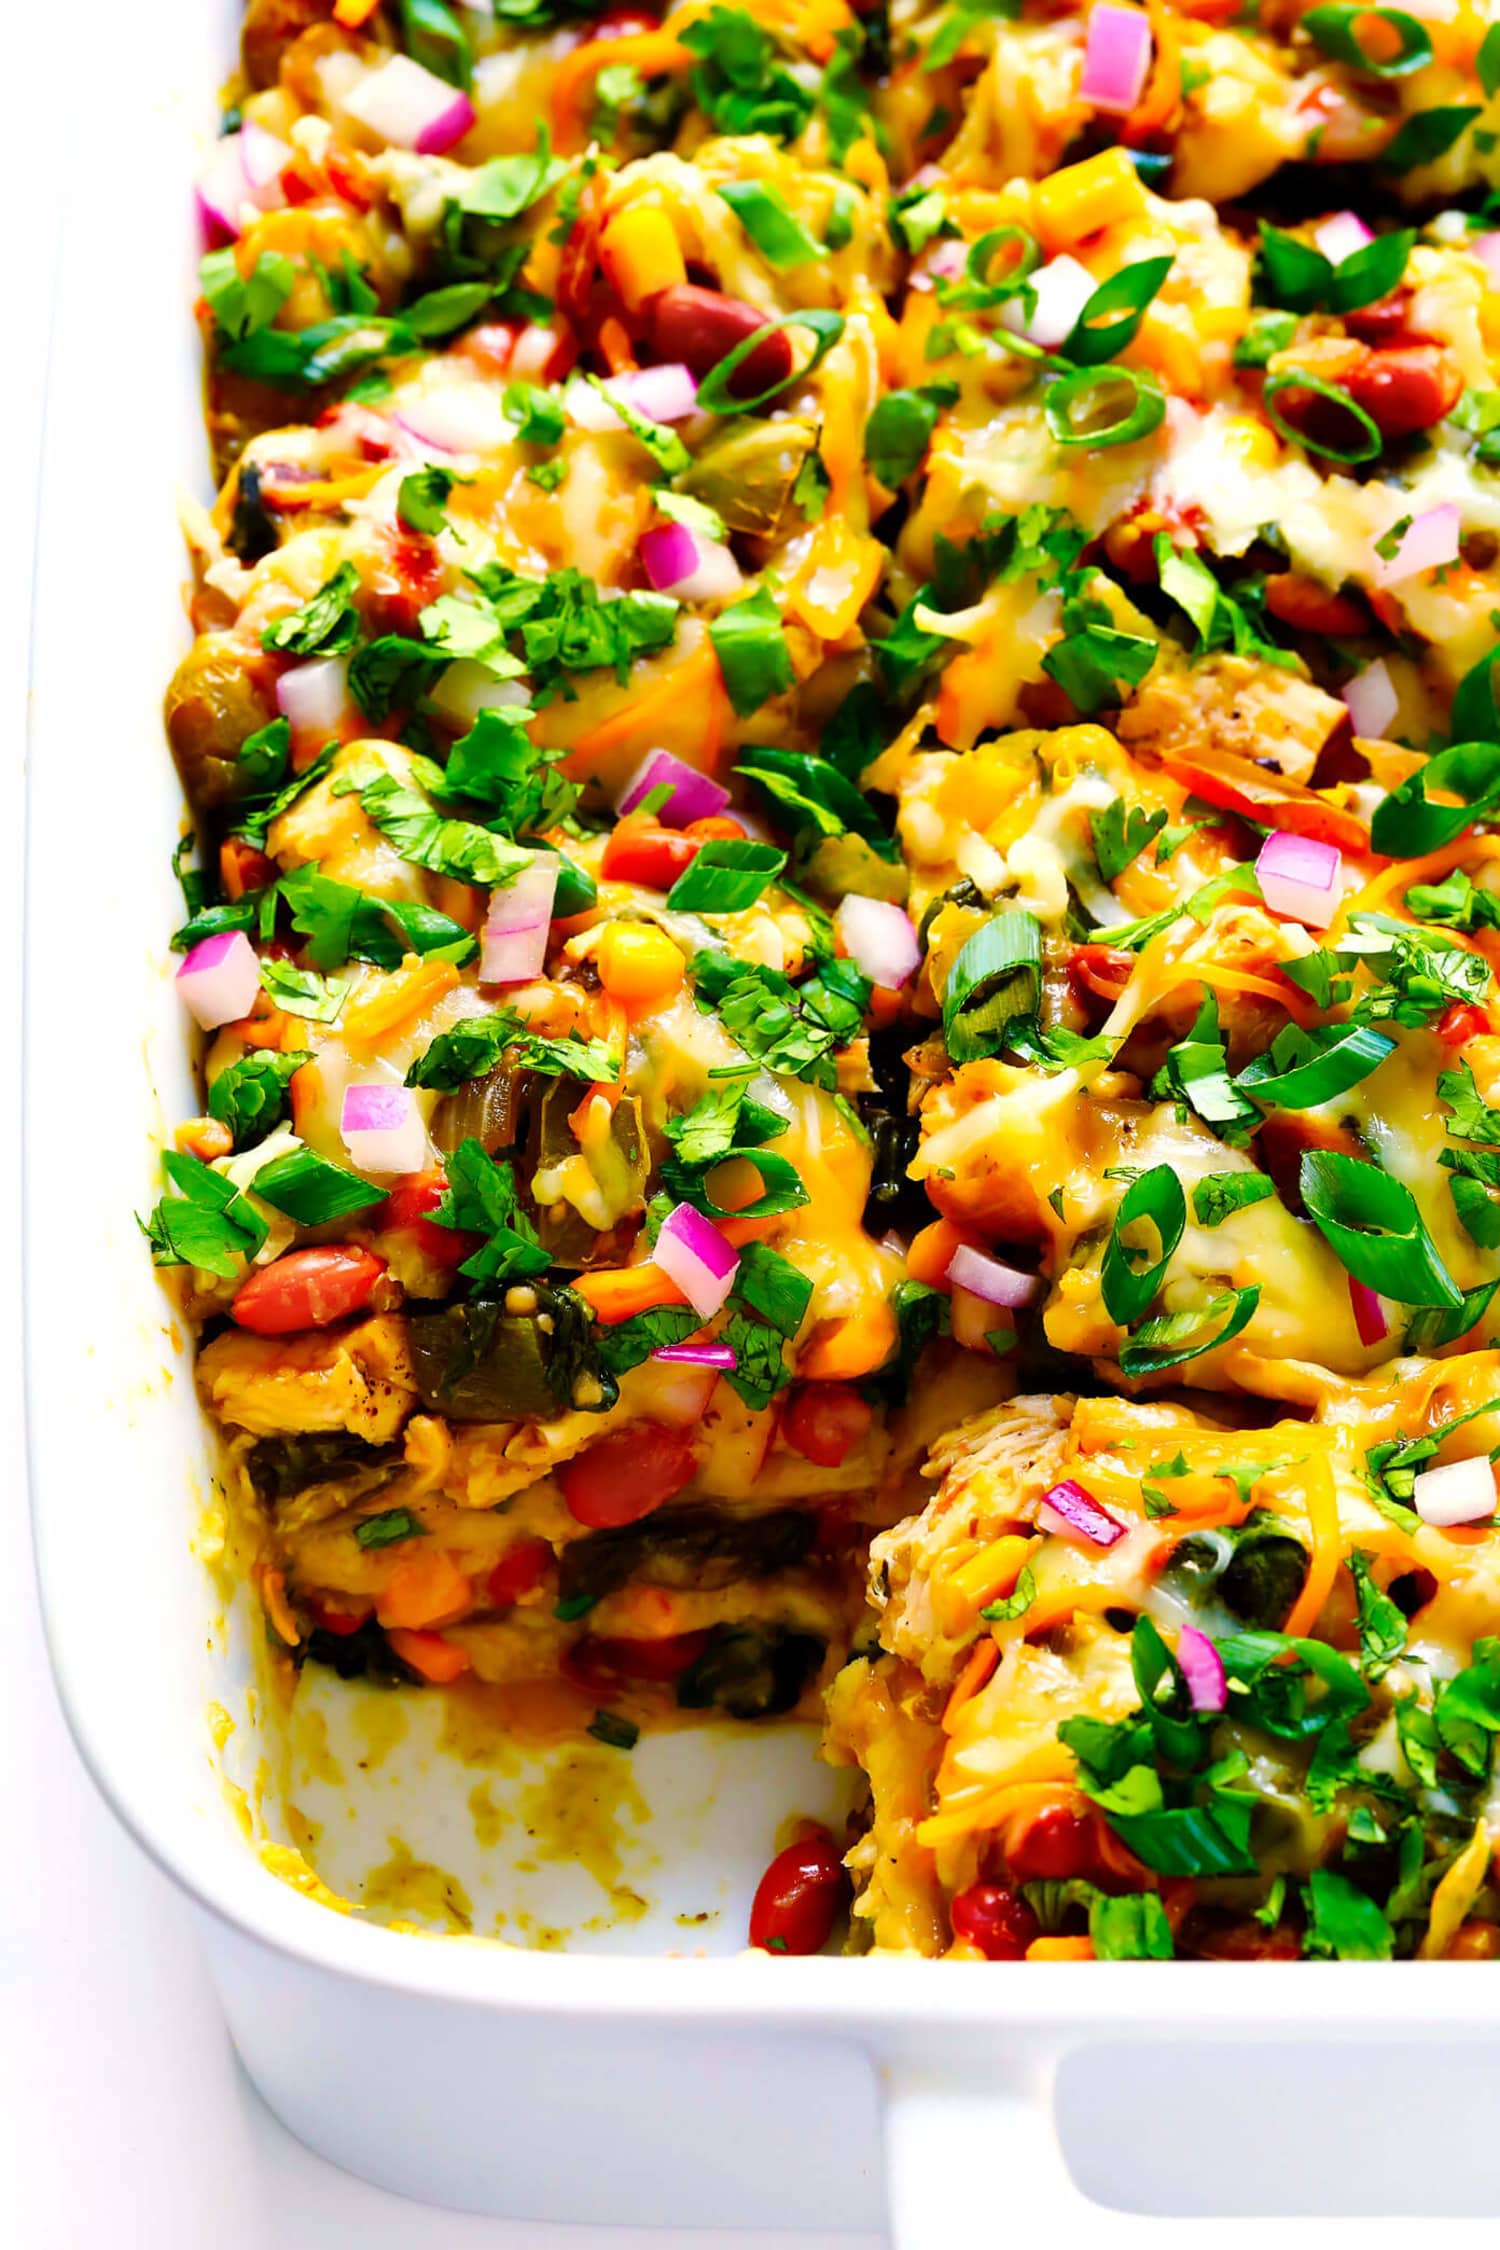 This Layered Chicken Enchilada Casserole Is a Must-Make | Kitchn